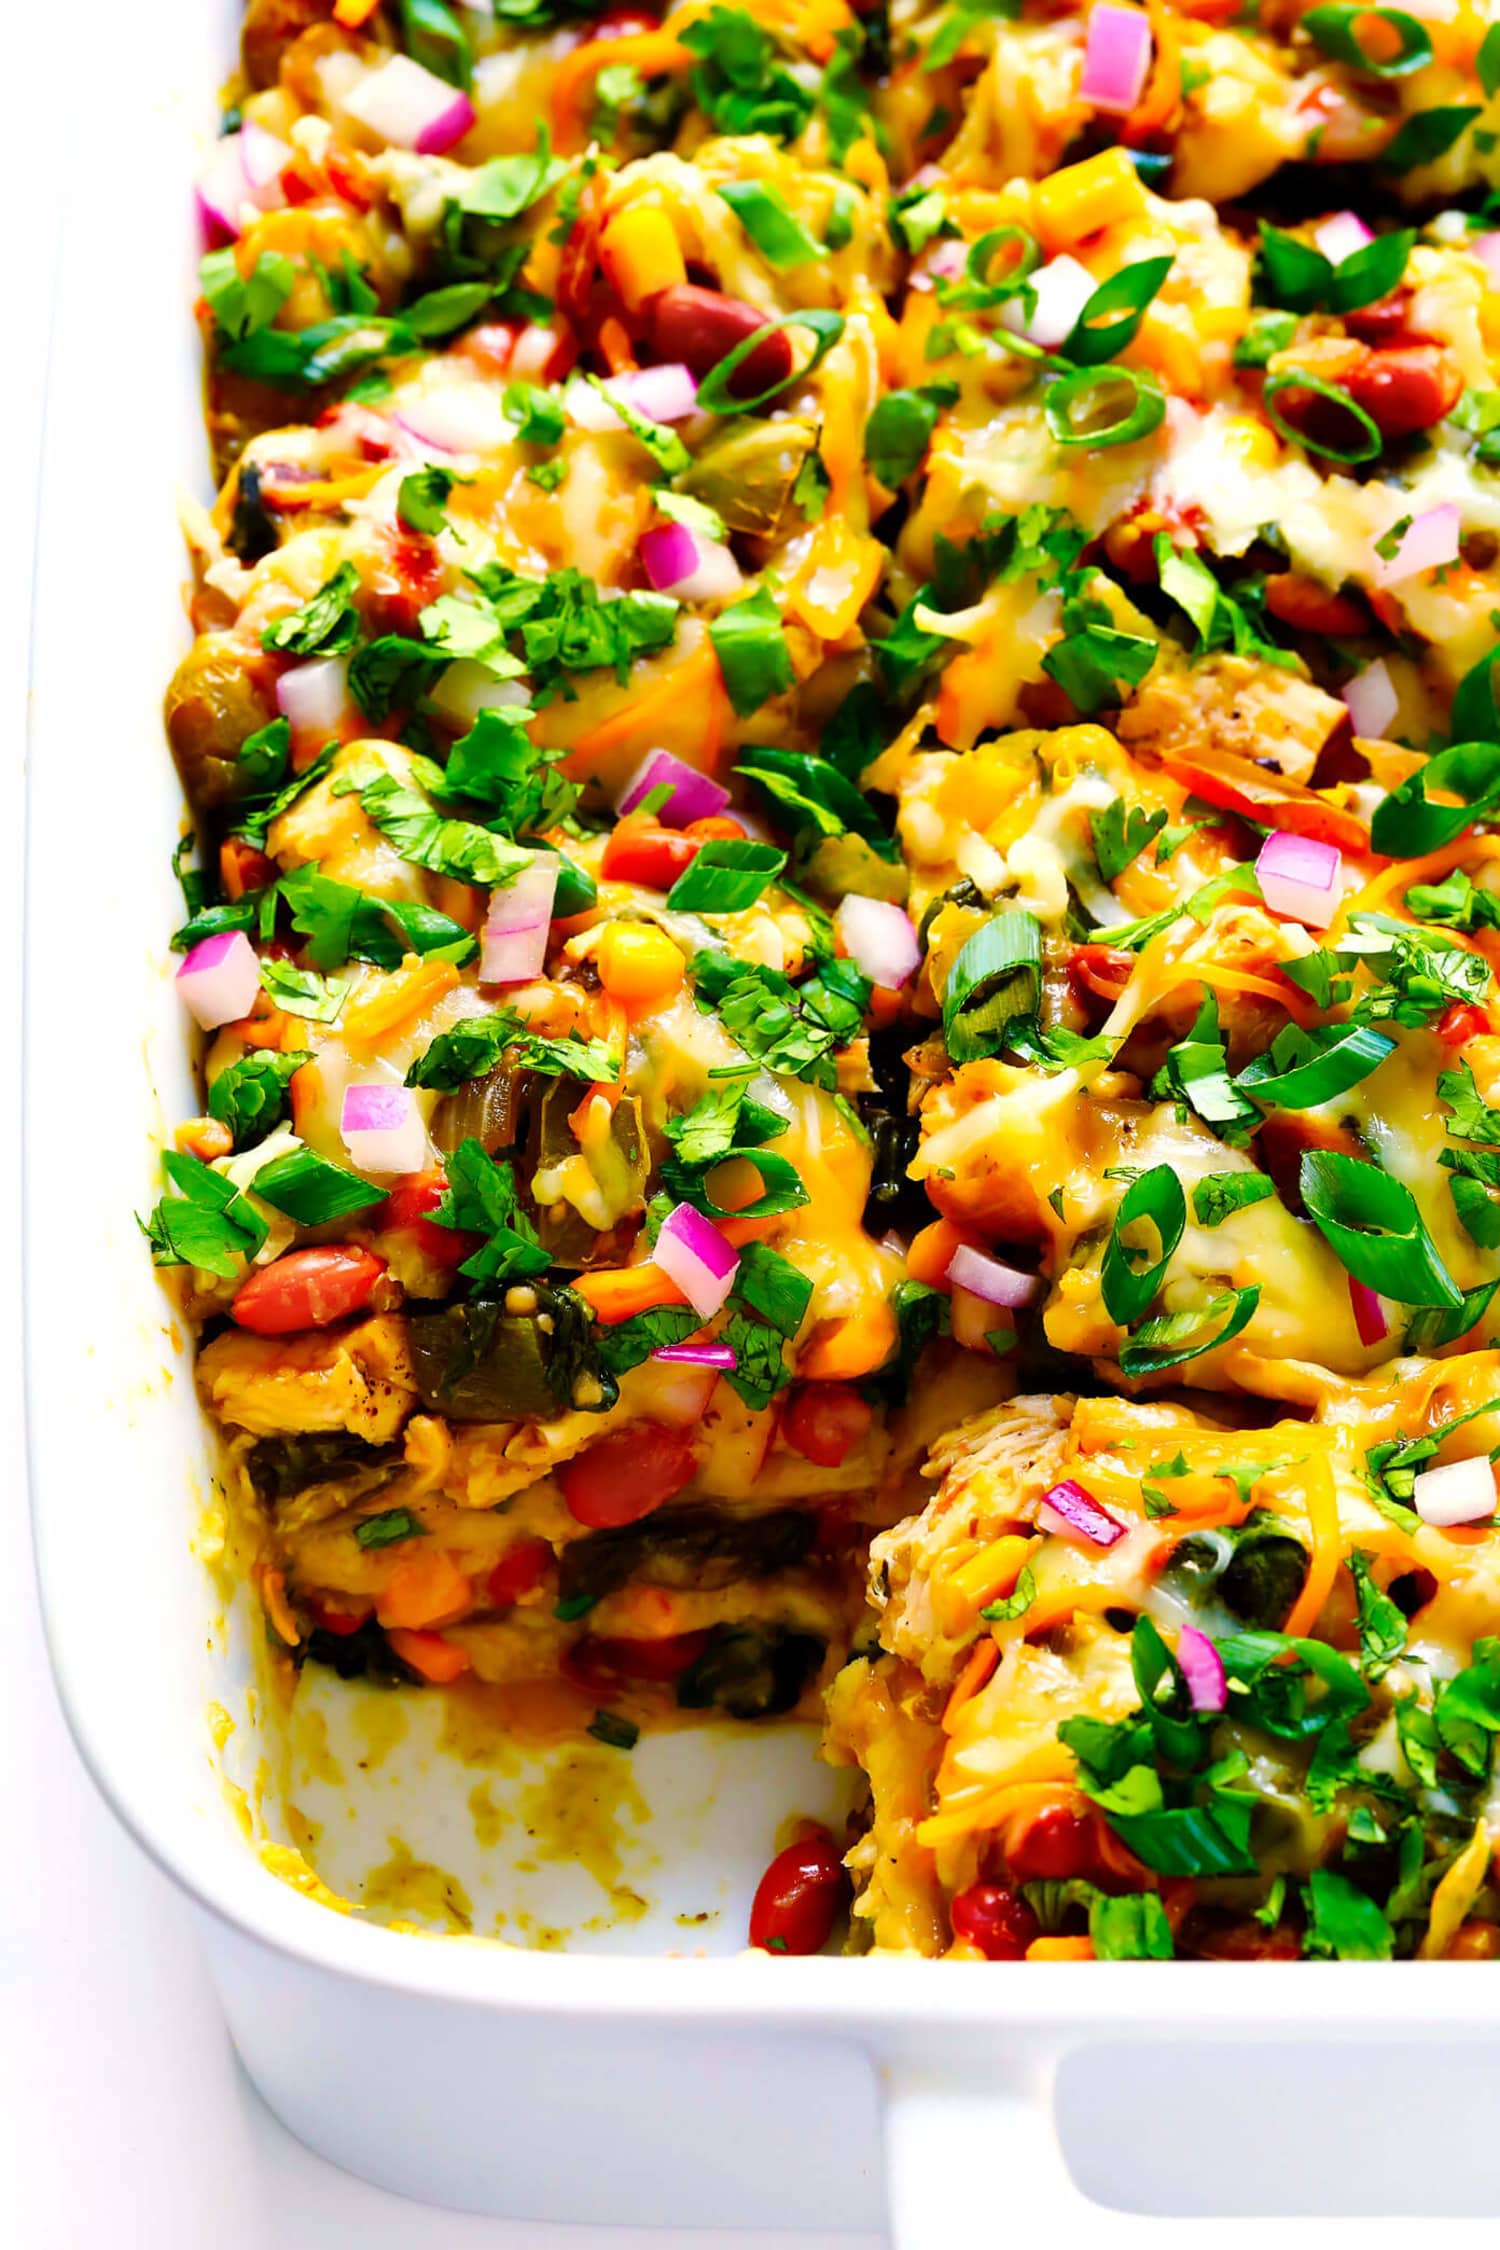 This Layered Chicken Enchilada Casserole Is a Must-Make | Kitchn